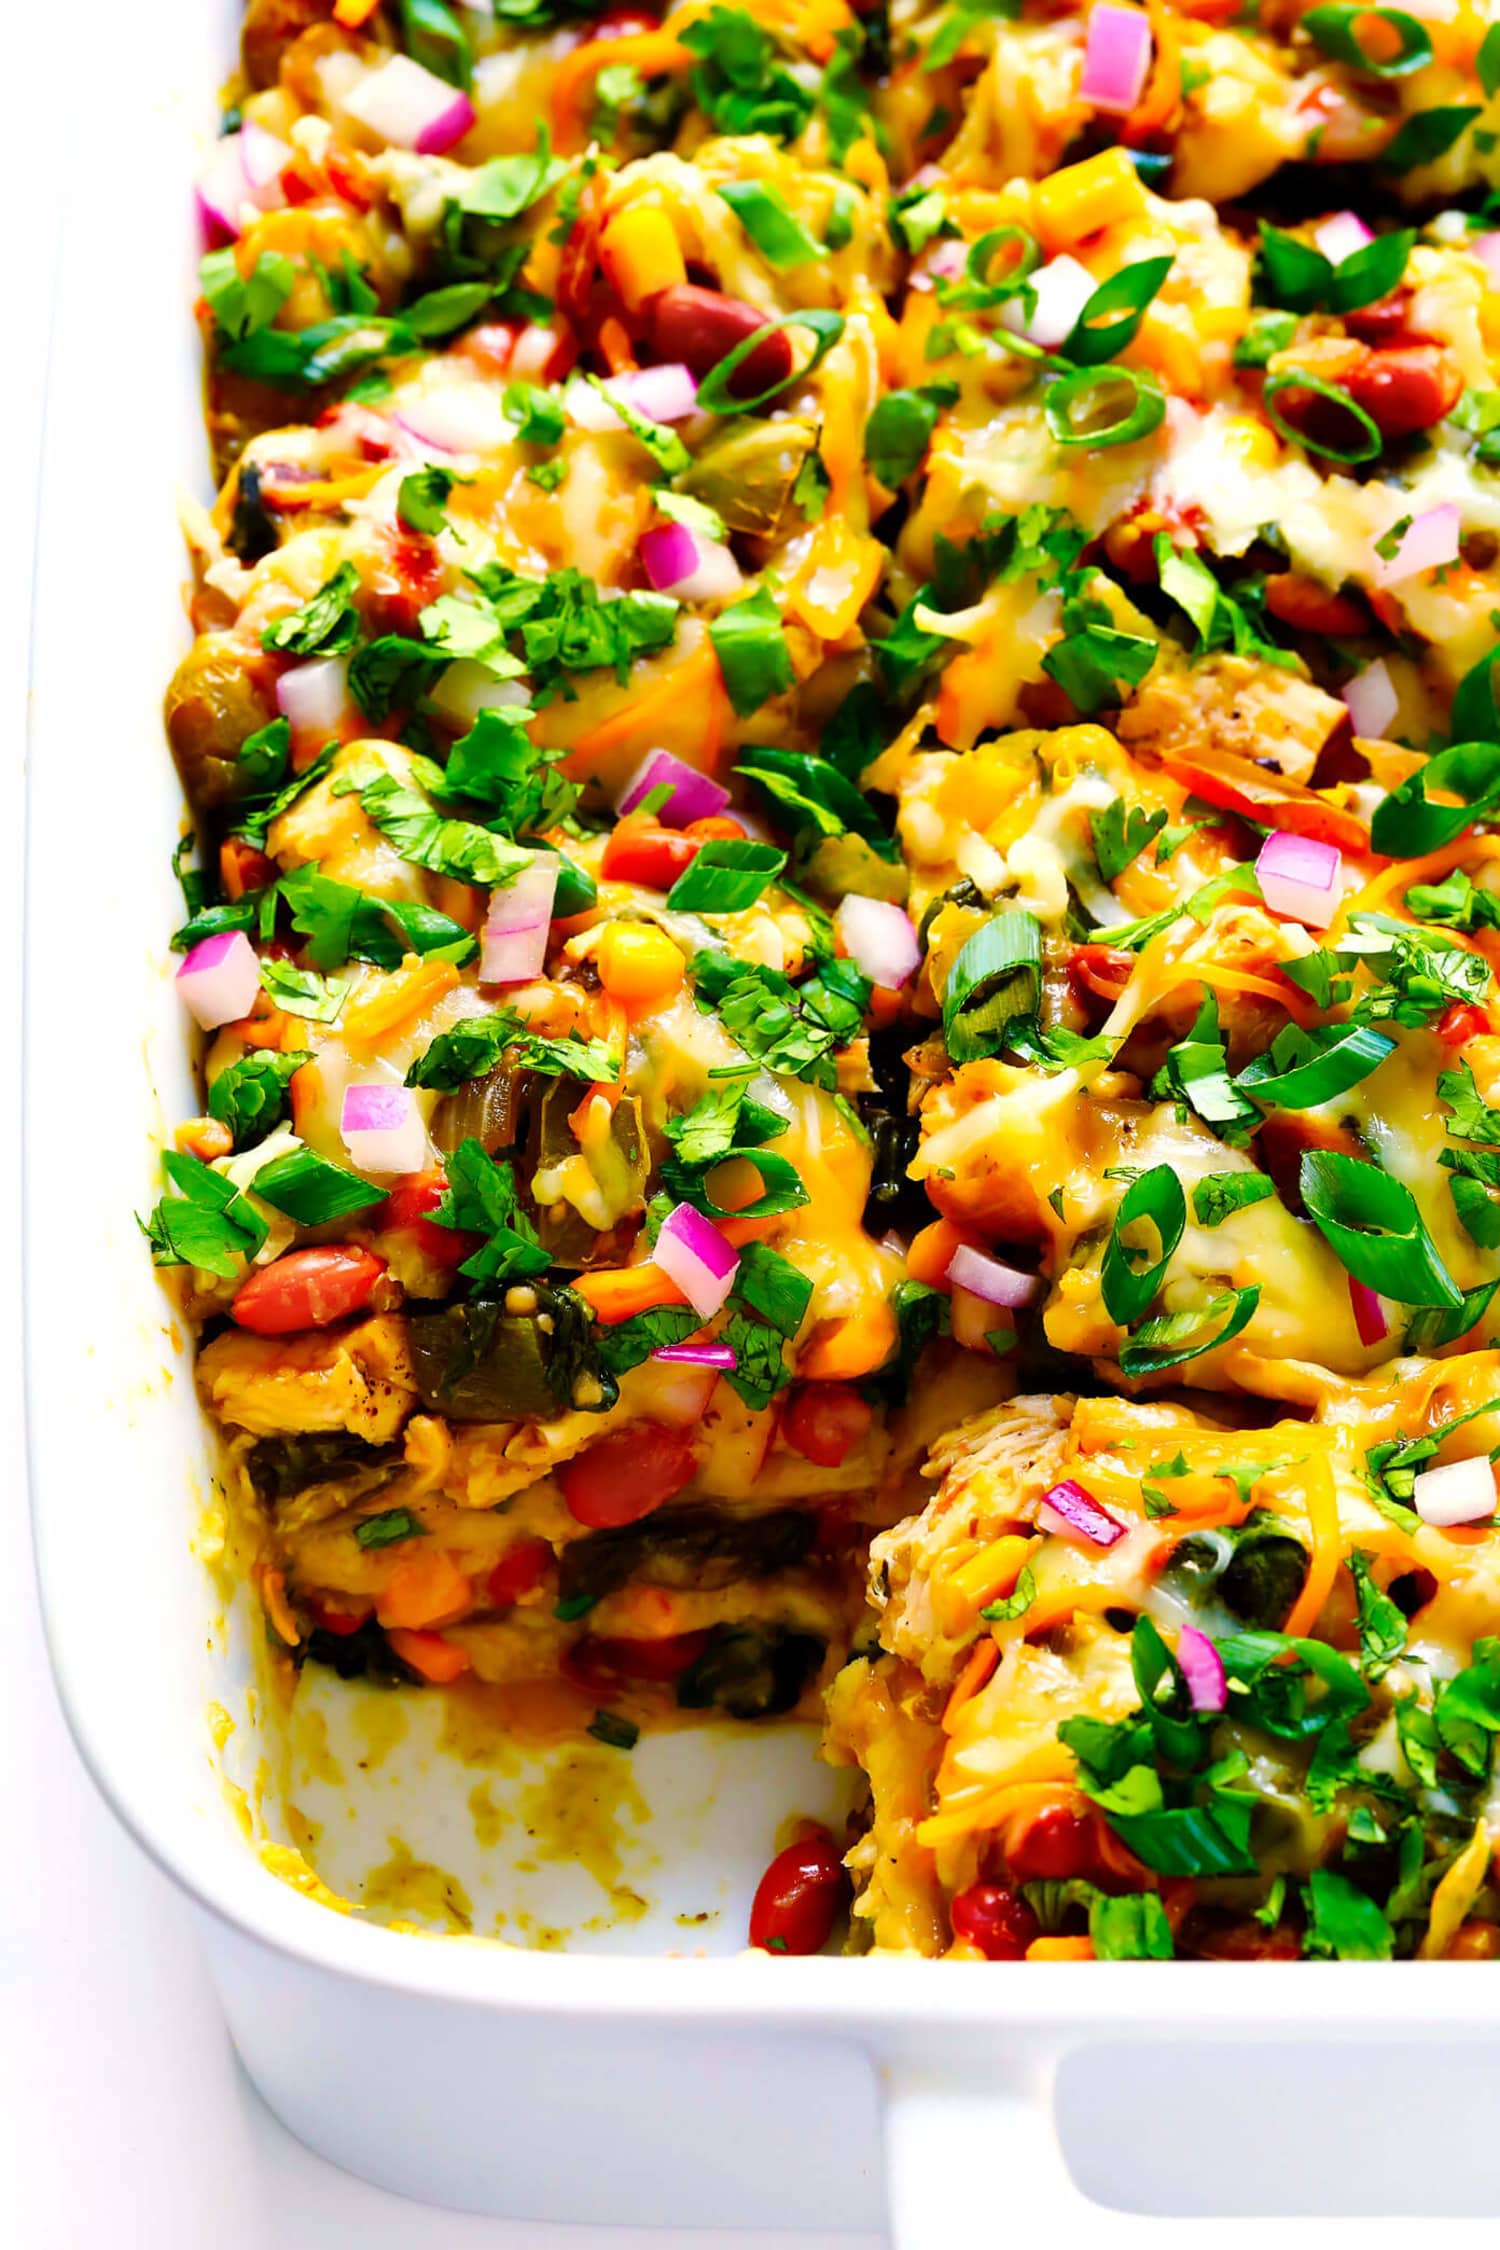 This Layered Chicken Enchilada Casserole Is a Must-Make | Kitchn